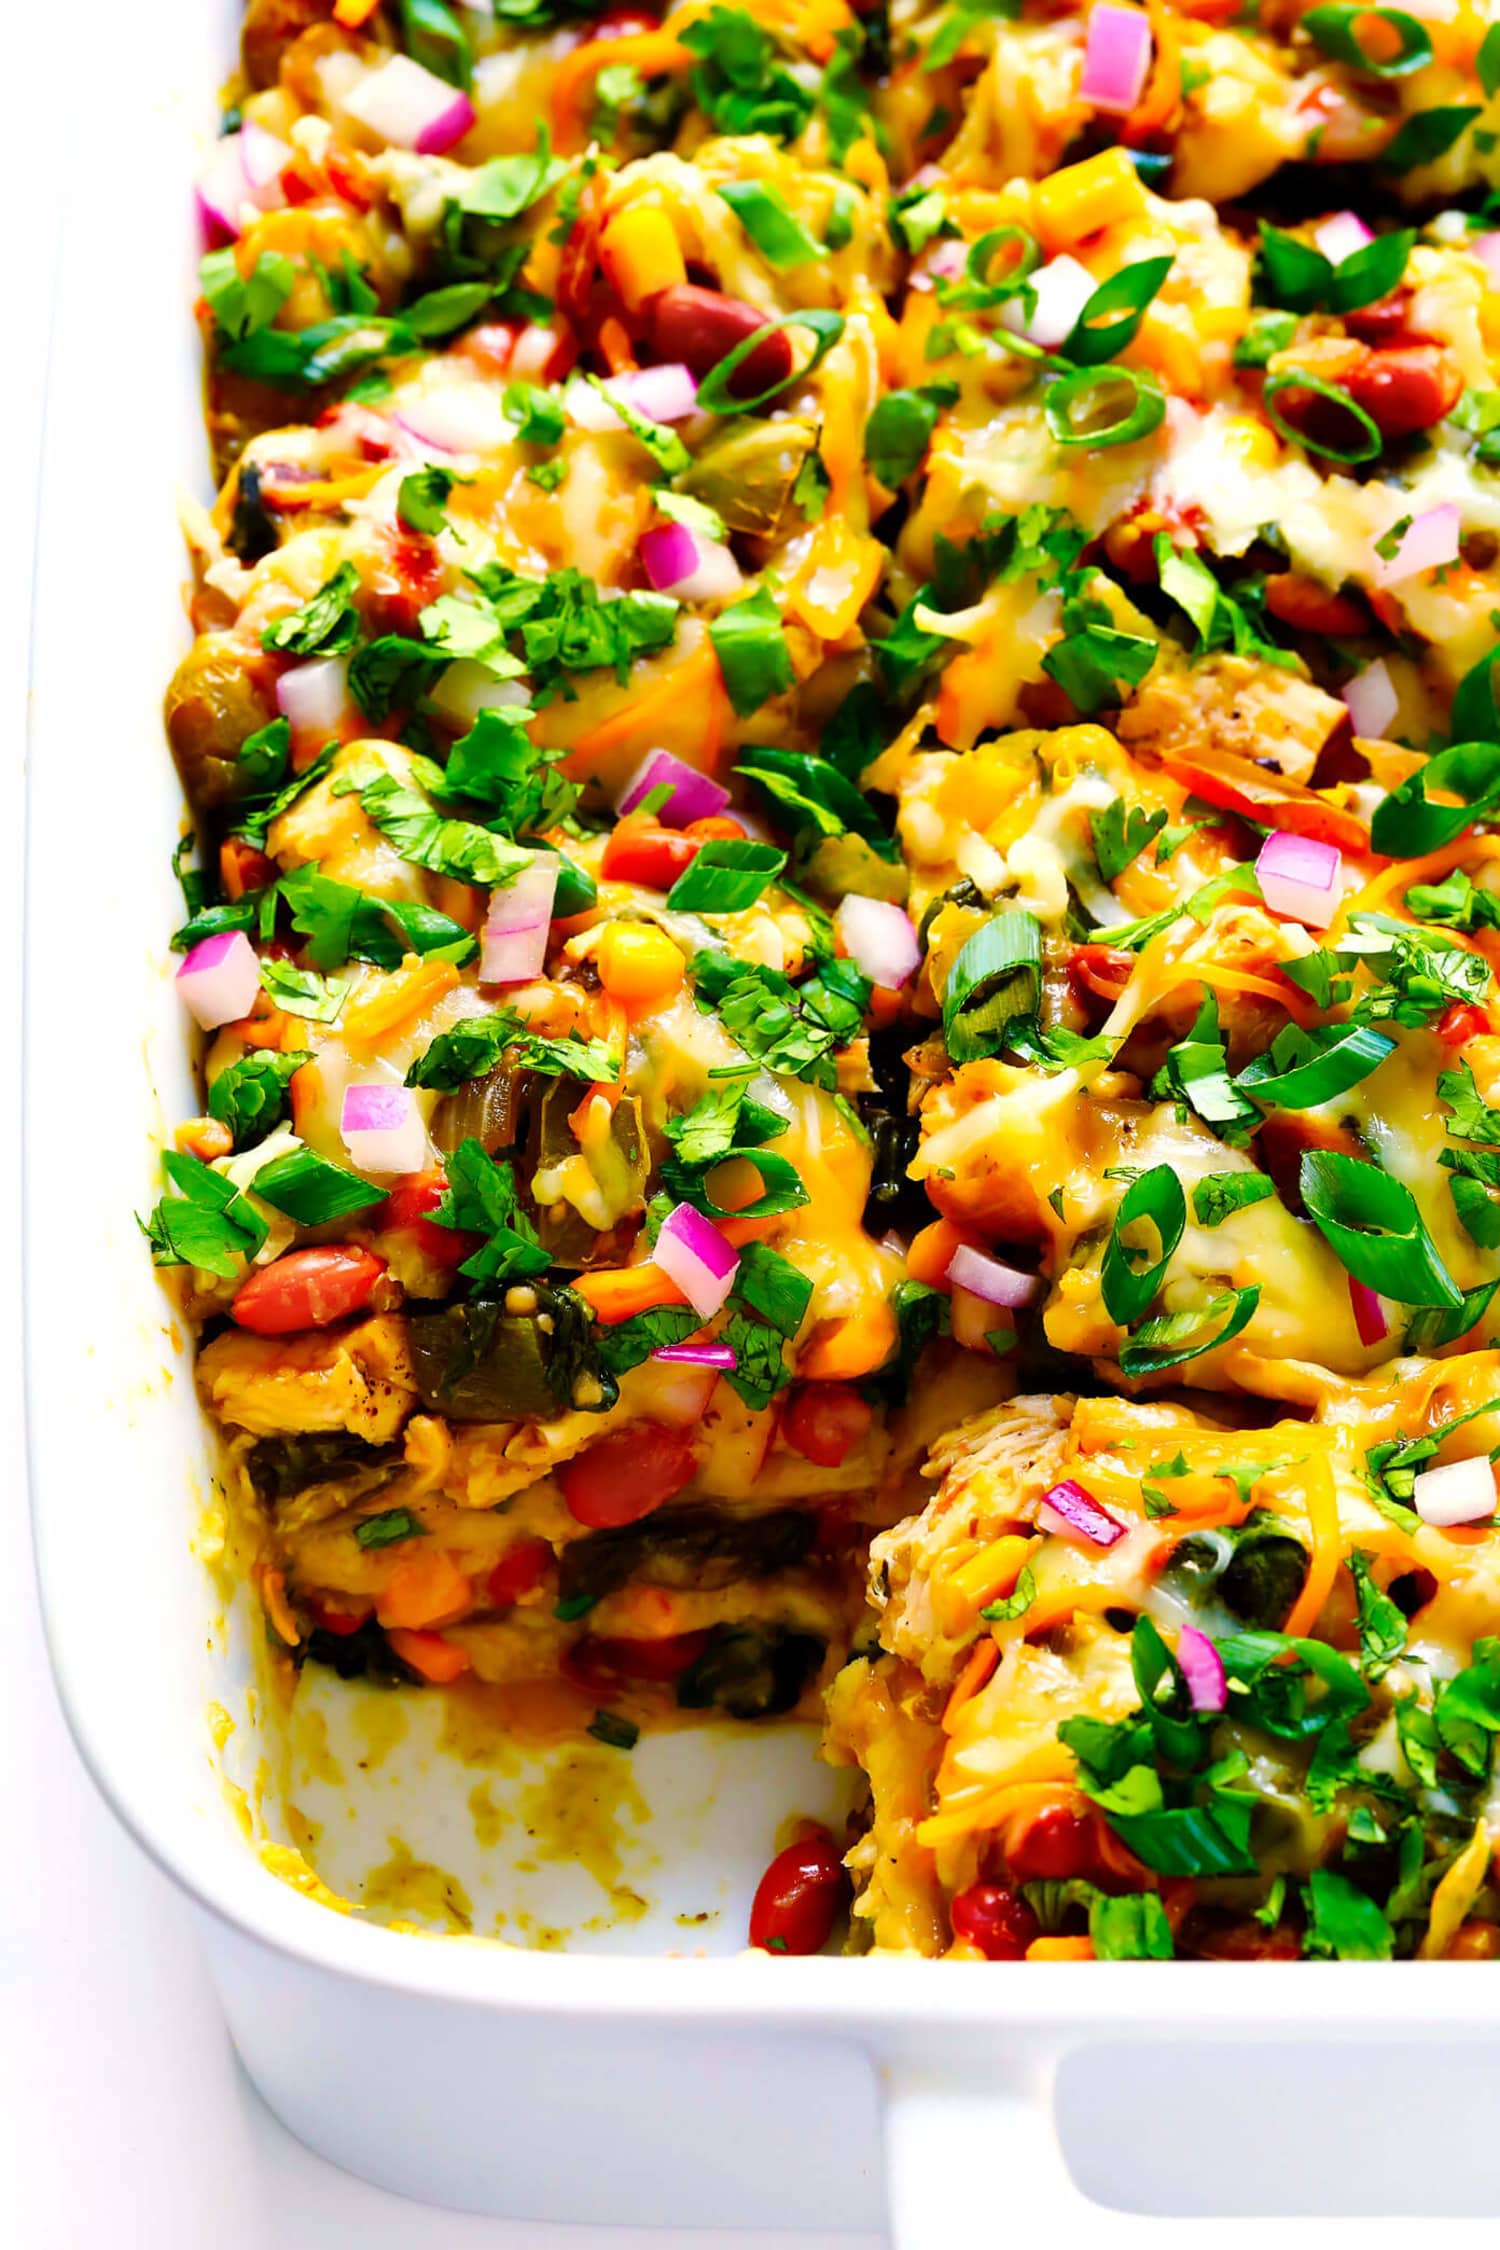 This Layered Chicken Enchilada Casserole Is a Must-Make | Kitchn